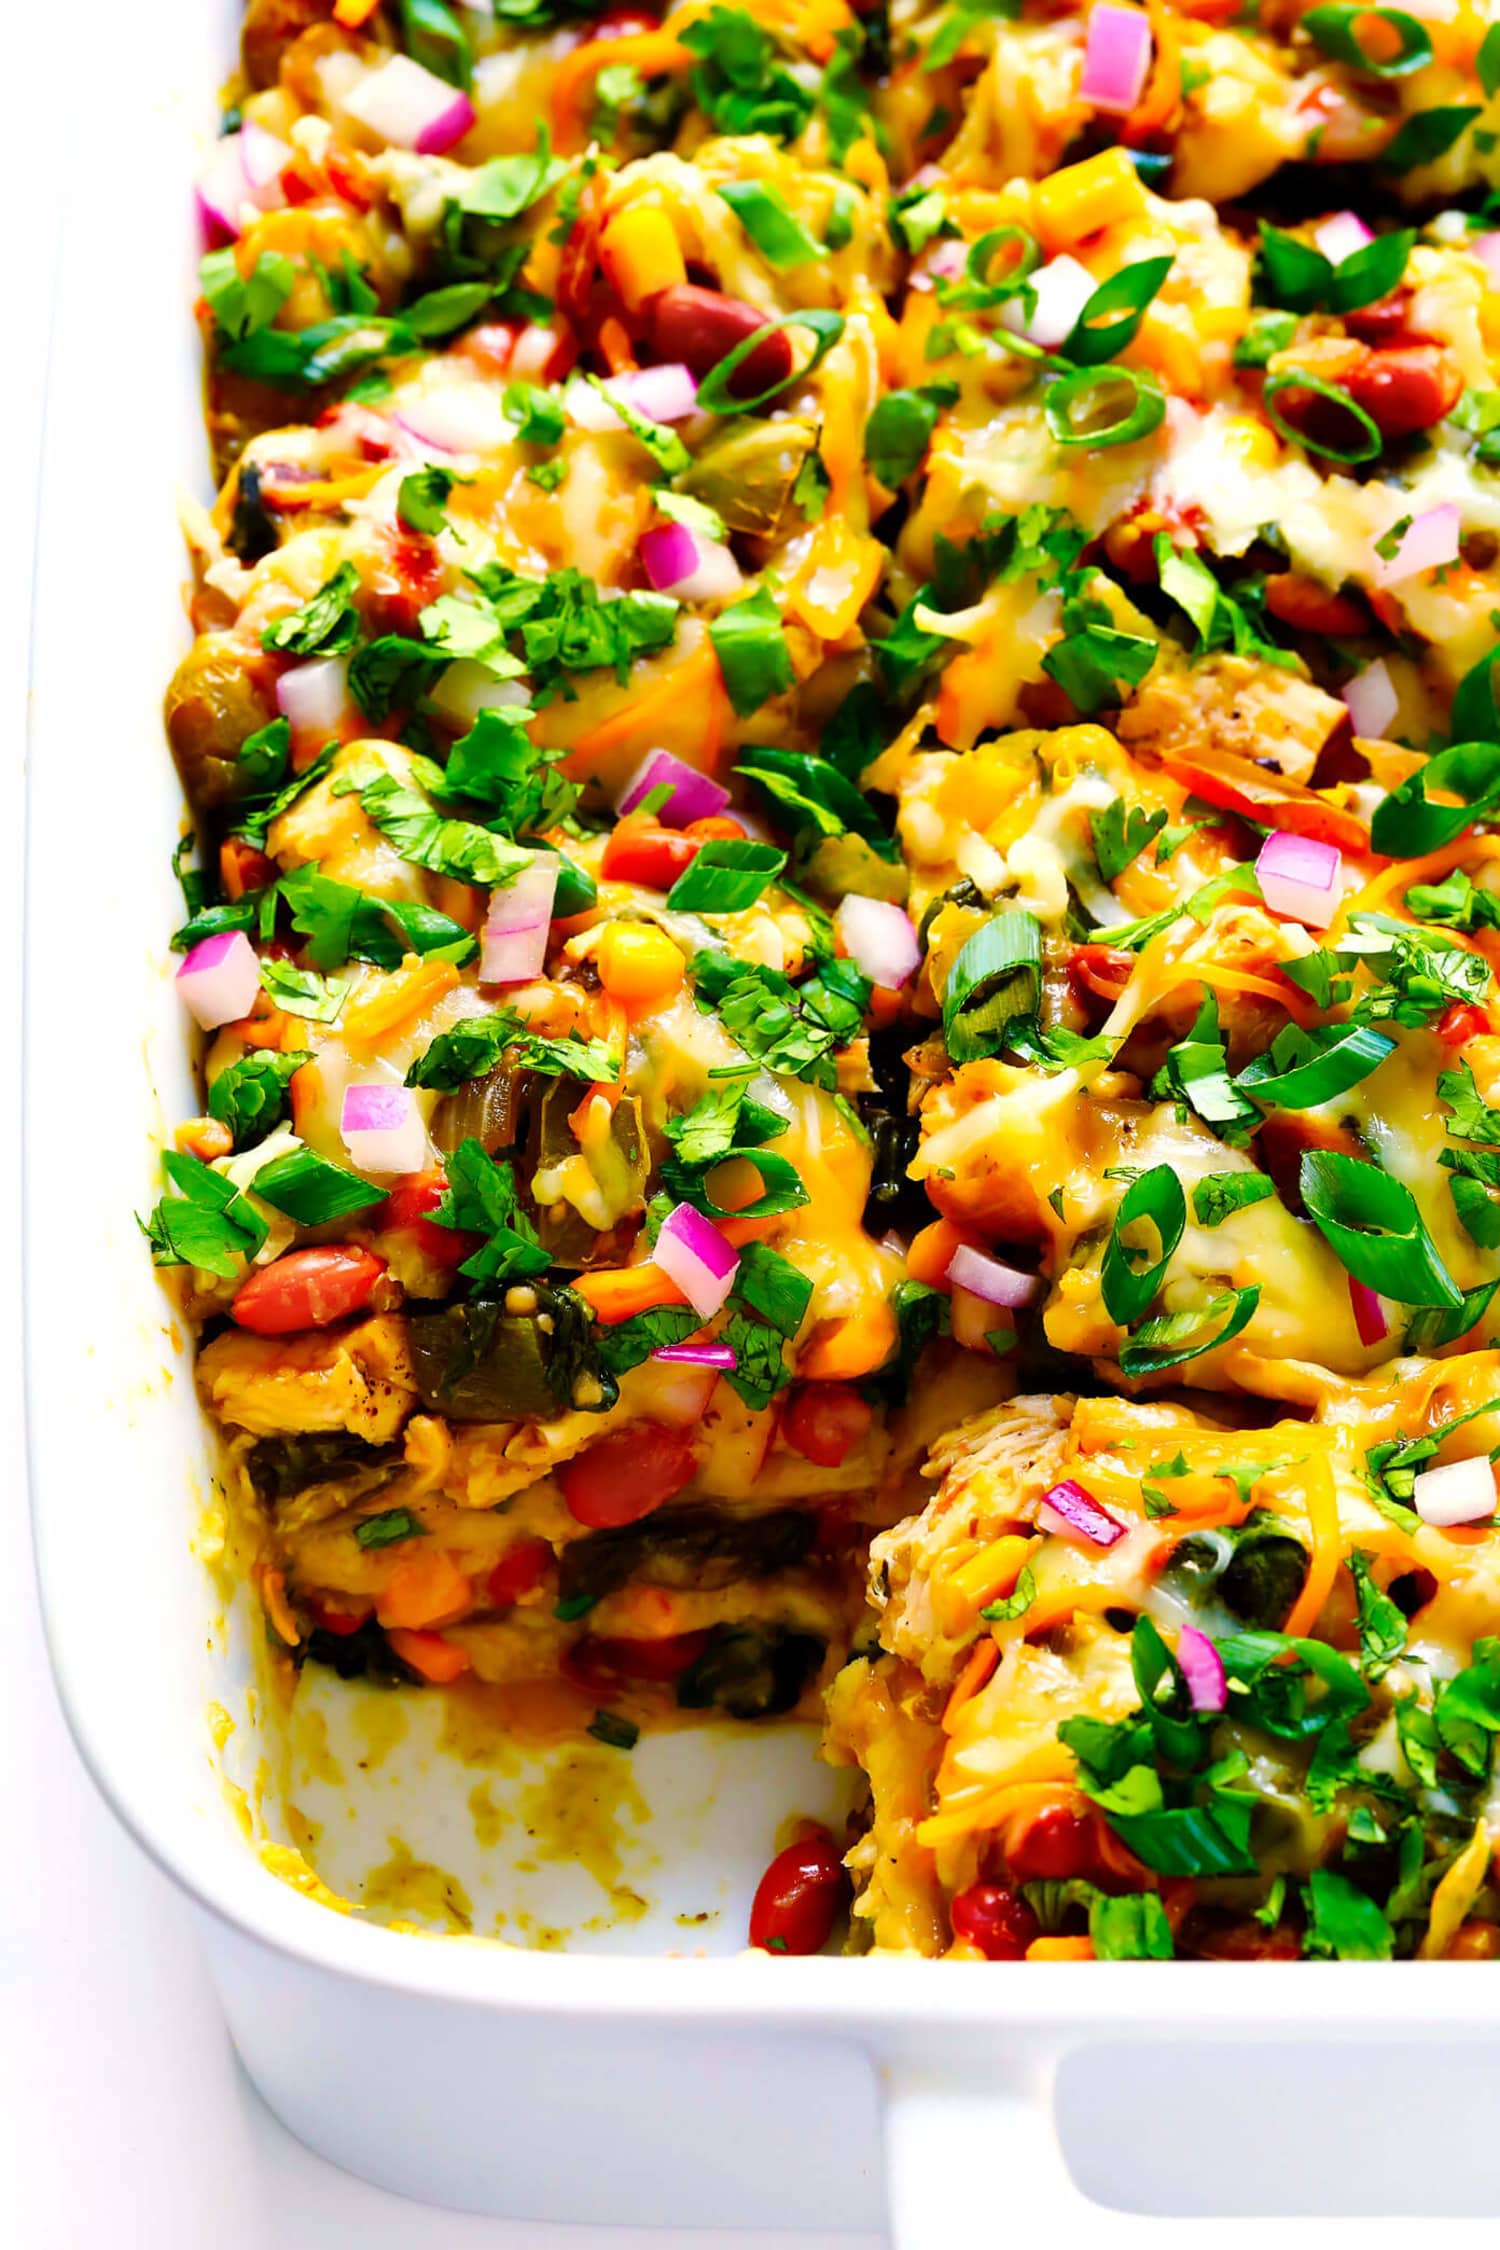 This Layered Chicken Enchilada Casserole Is a Must-Make | Kitchn